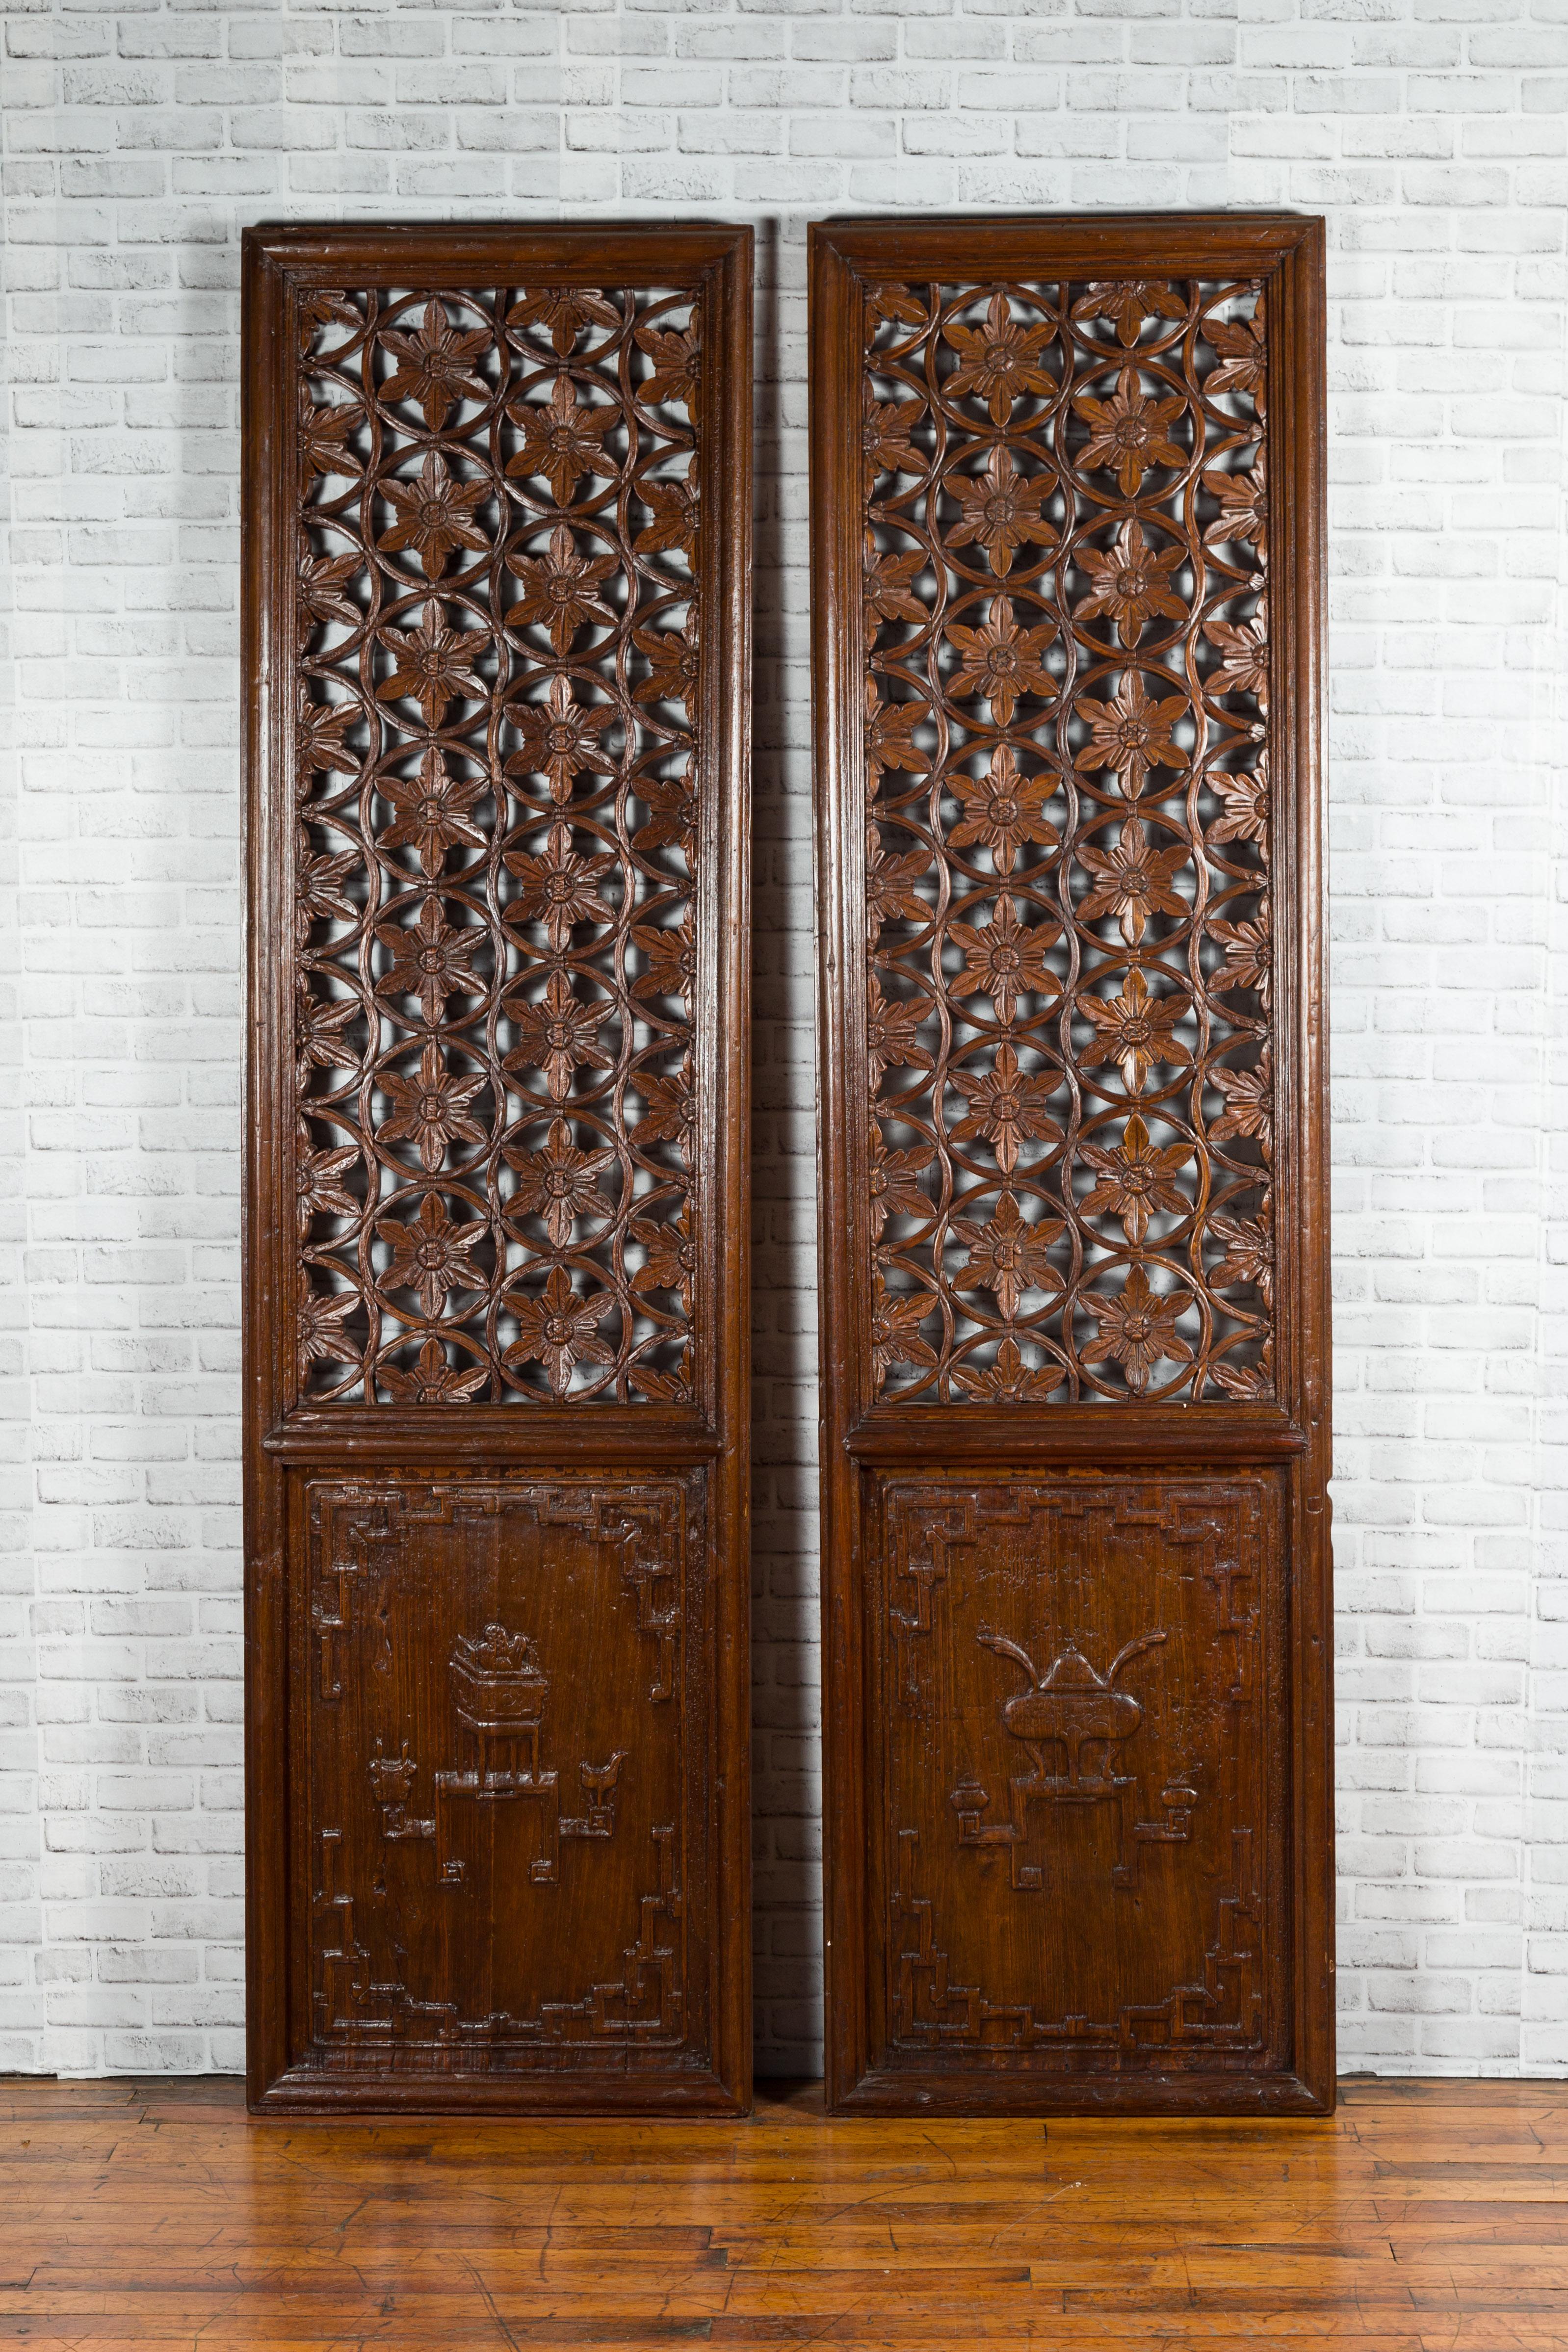 A pair of Chinese wooden panels from the 19th century, with floral motifs and carved objects. Created in China during the 19th century, each of this pair of wooden panels attracts our attention with its exquisite floral pierced decor adorning the